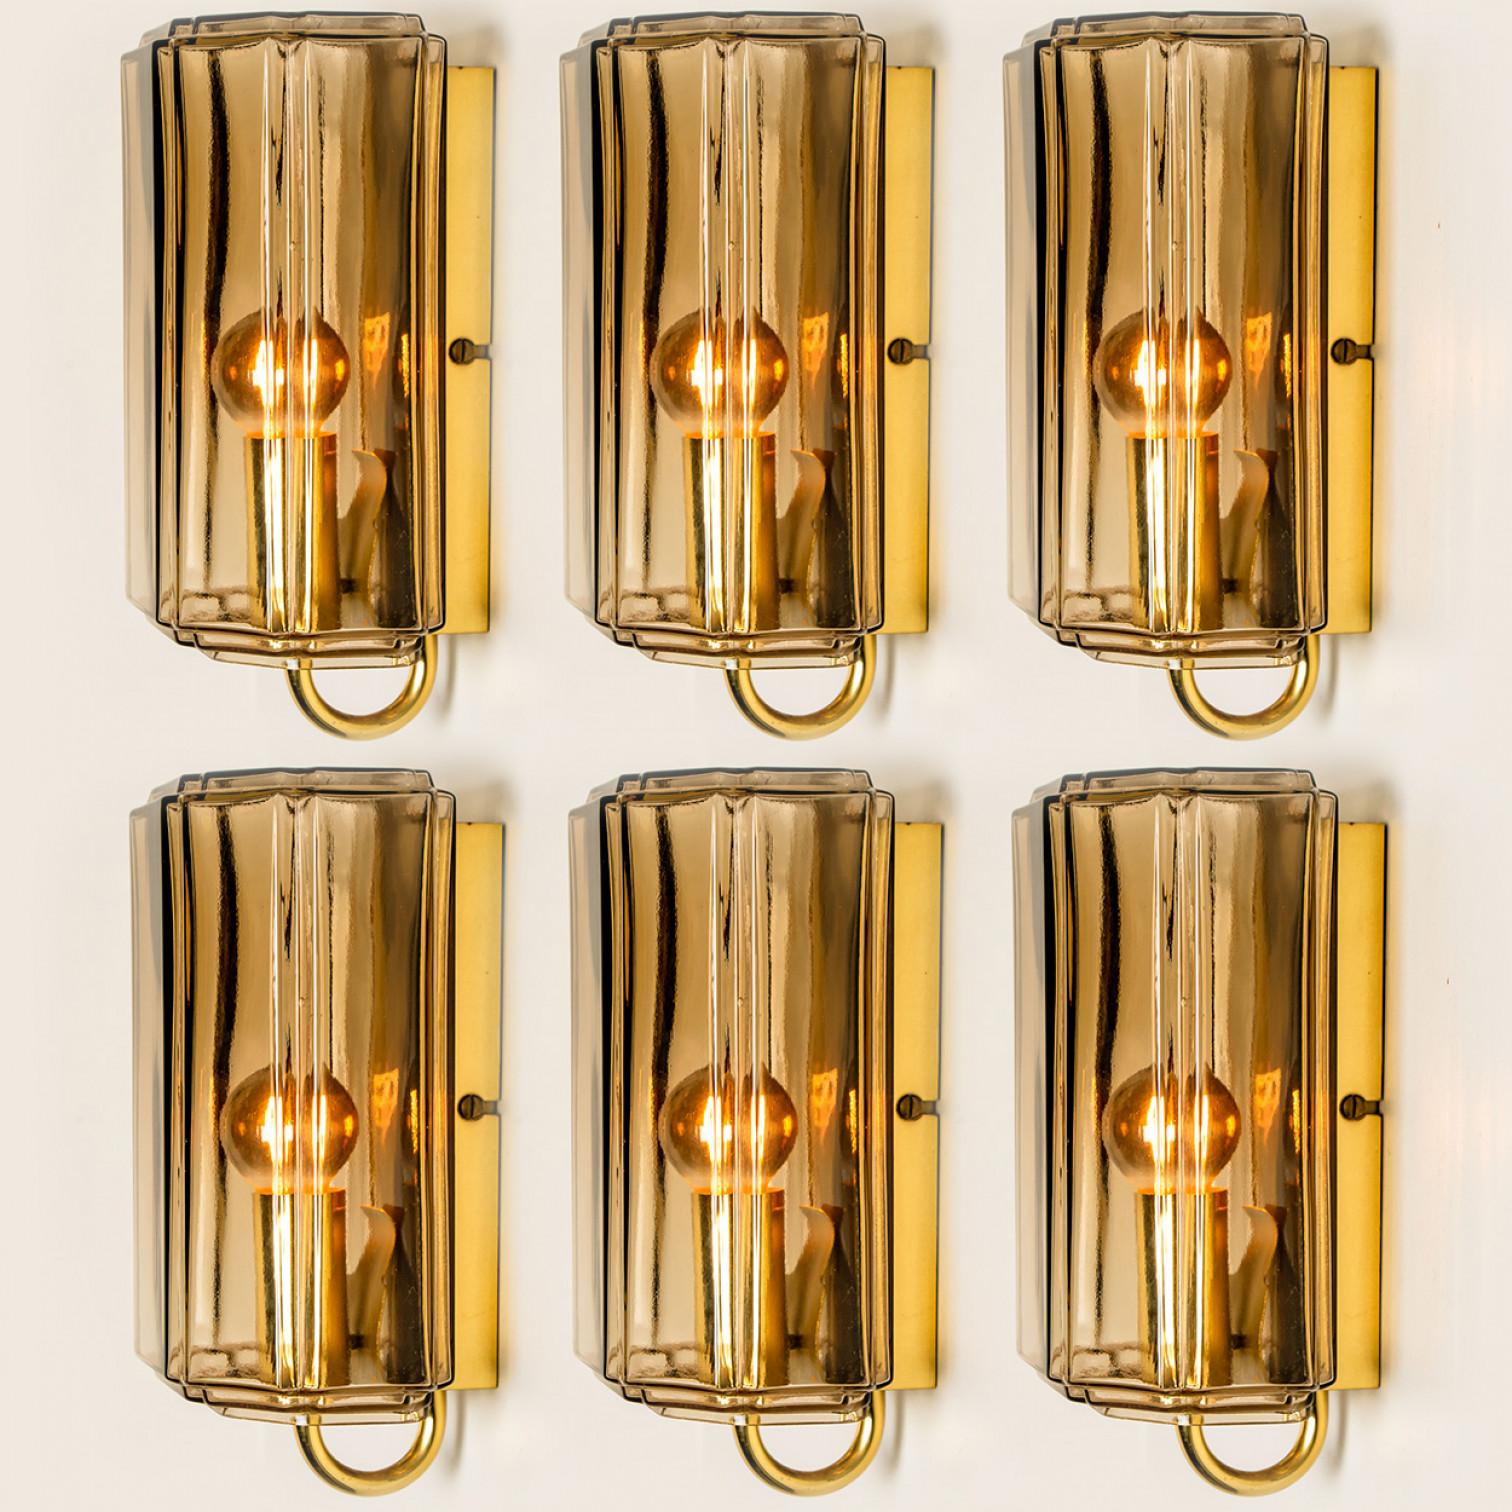 Several Smoked Glass Wall Lights Sconces by Glashütte Limburg, Germany, 1960 For Sale 1